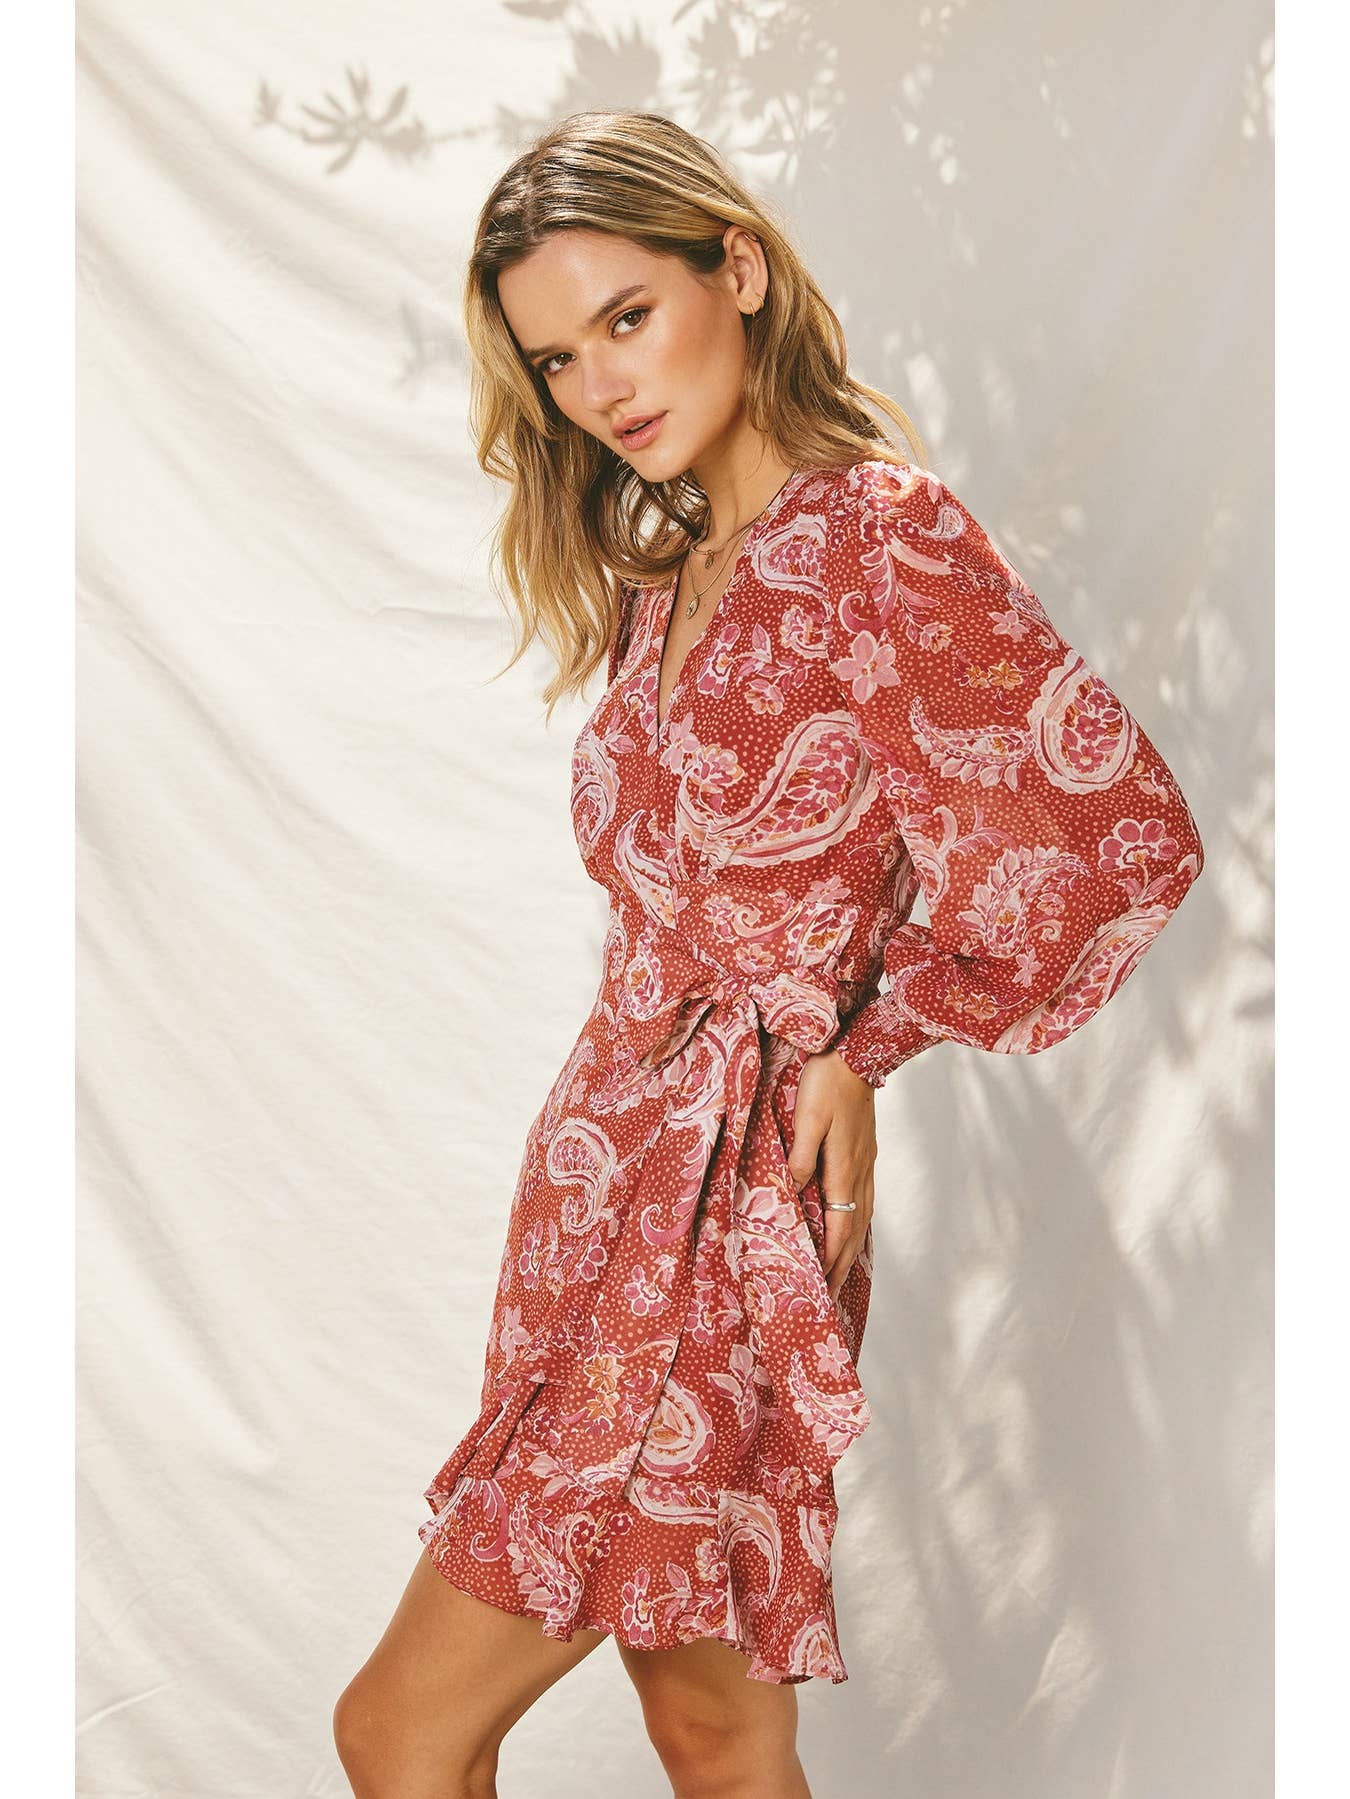 Rose Paisley Print Wrap Dress, REBELRY BOUTIQUE, Arvada, CO